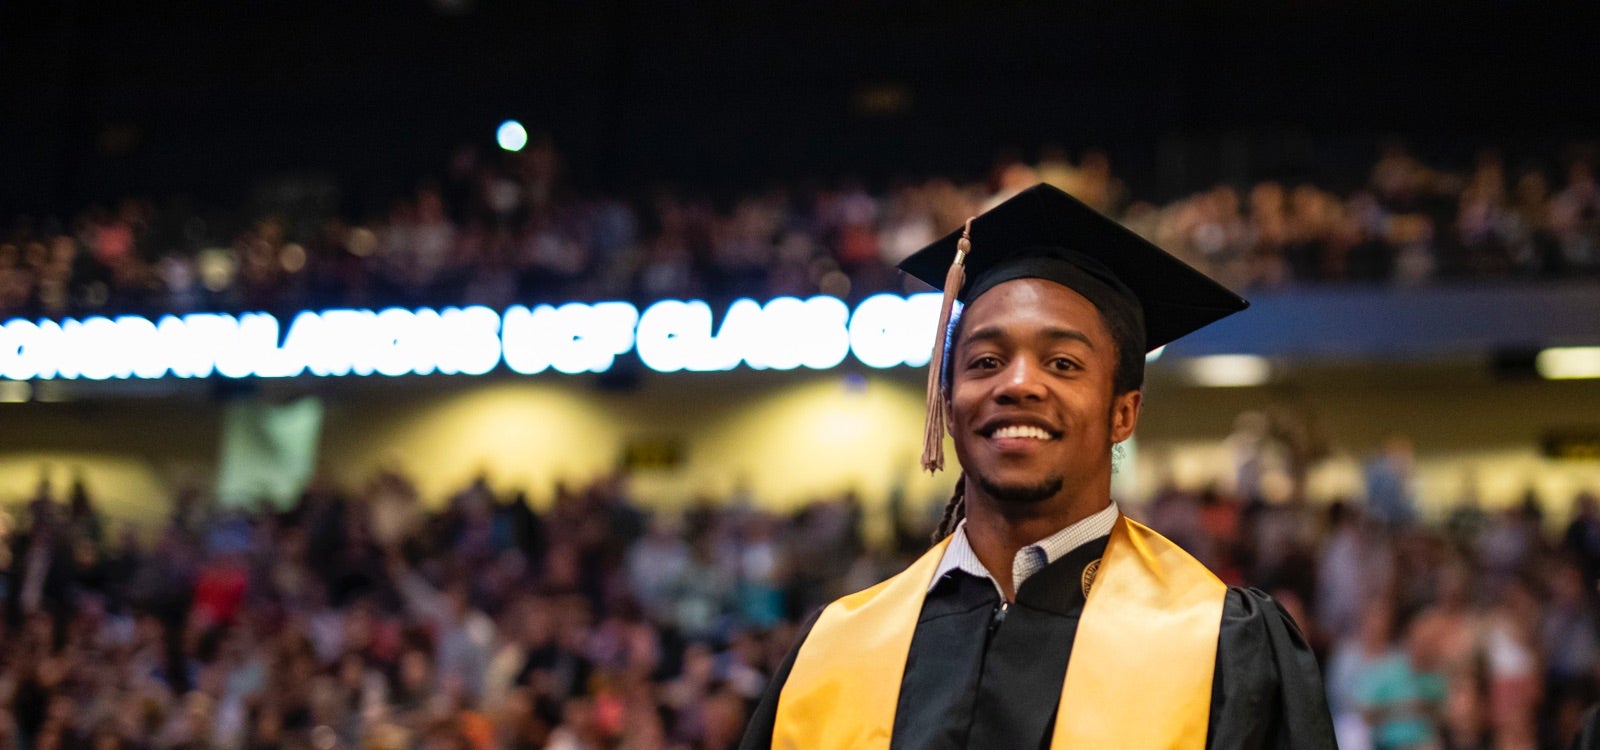 image of male at ucf graduation